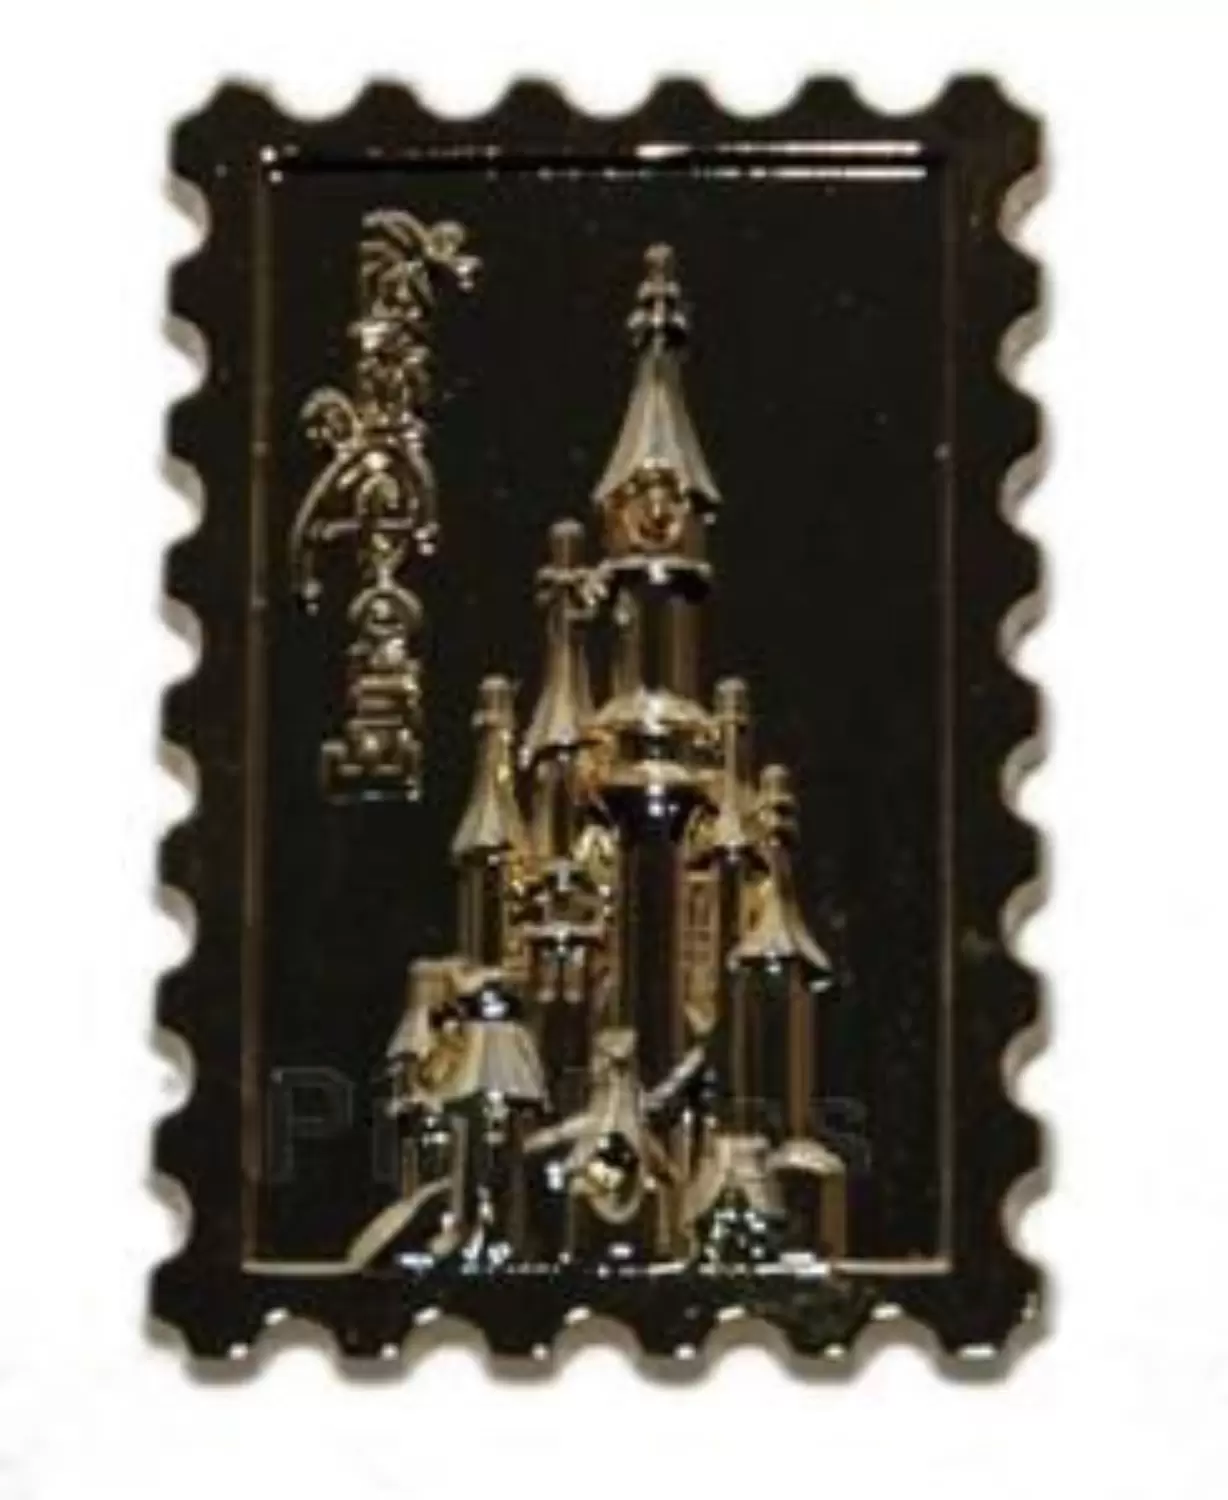 Pins Limited Edition - Reissue Castle Stamp